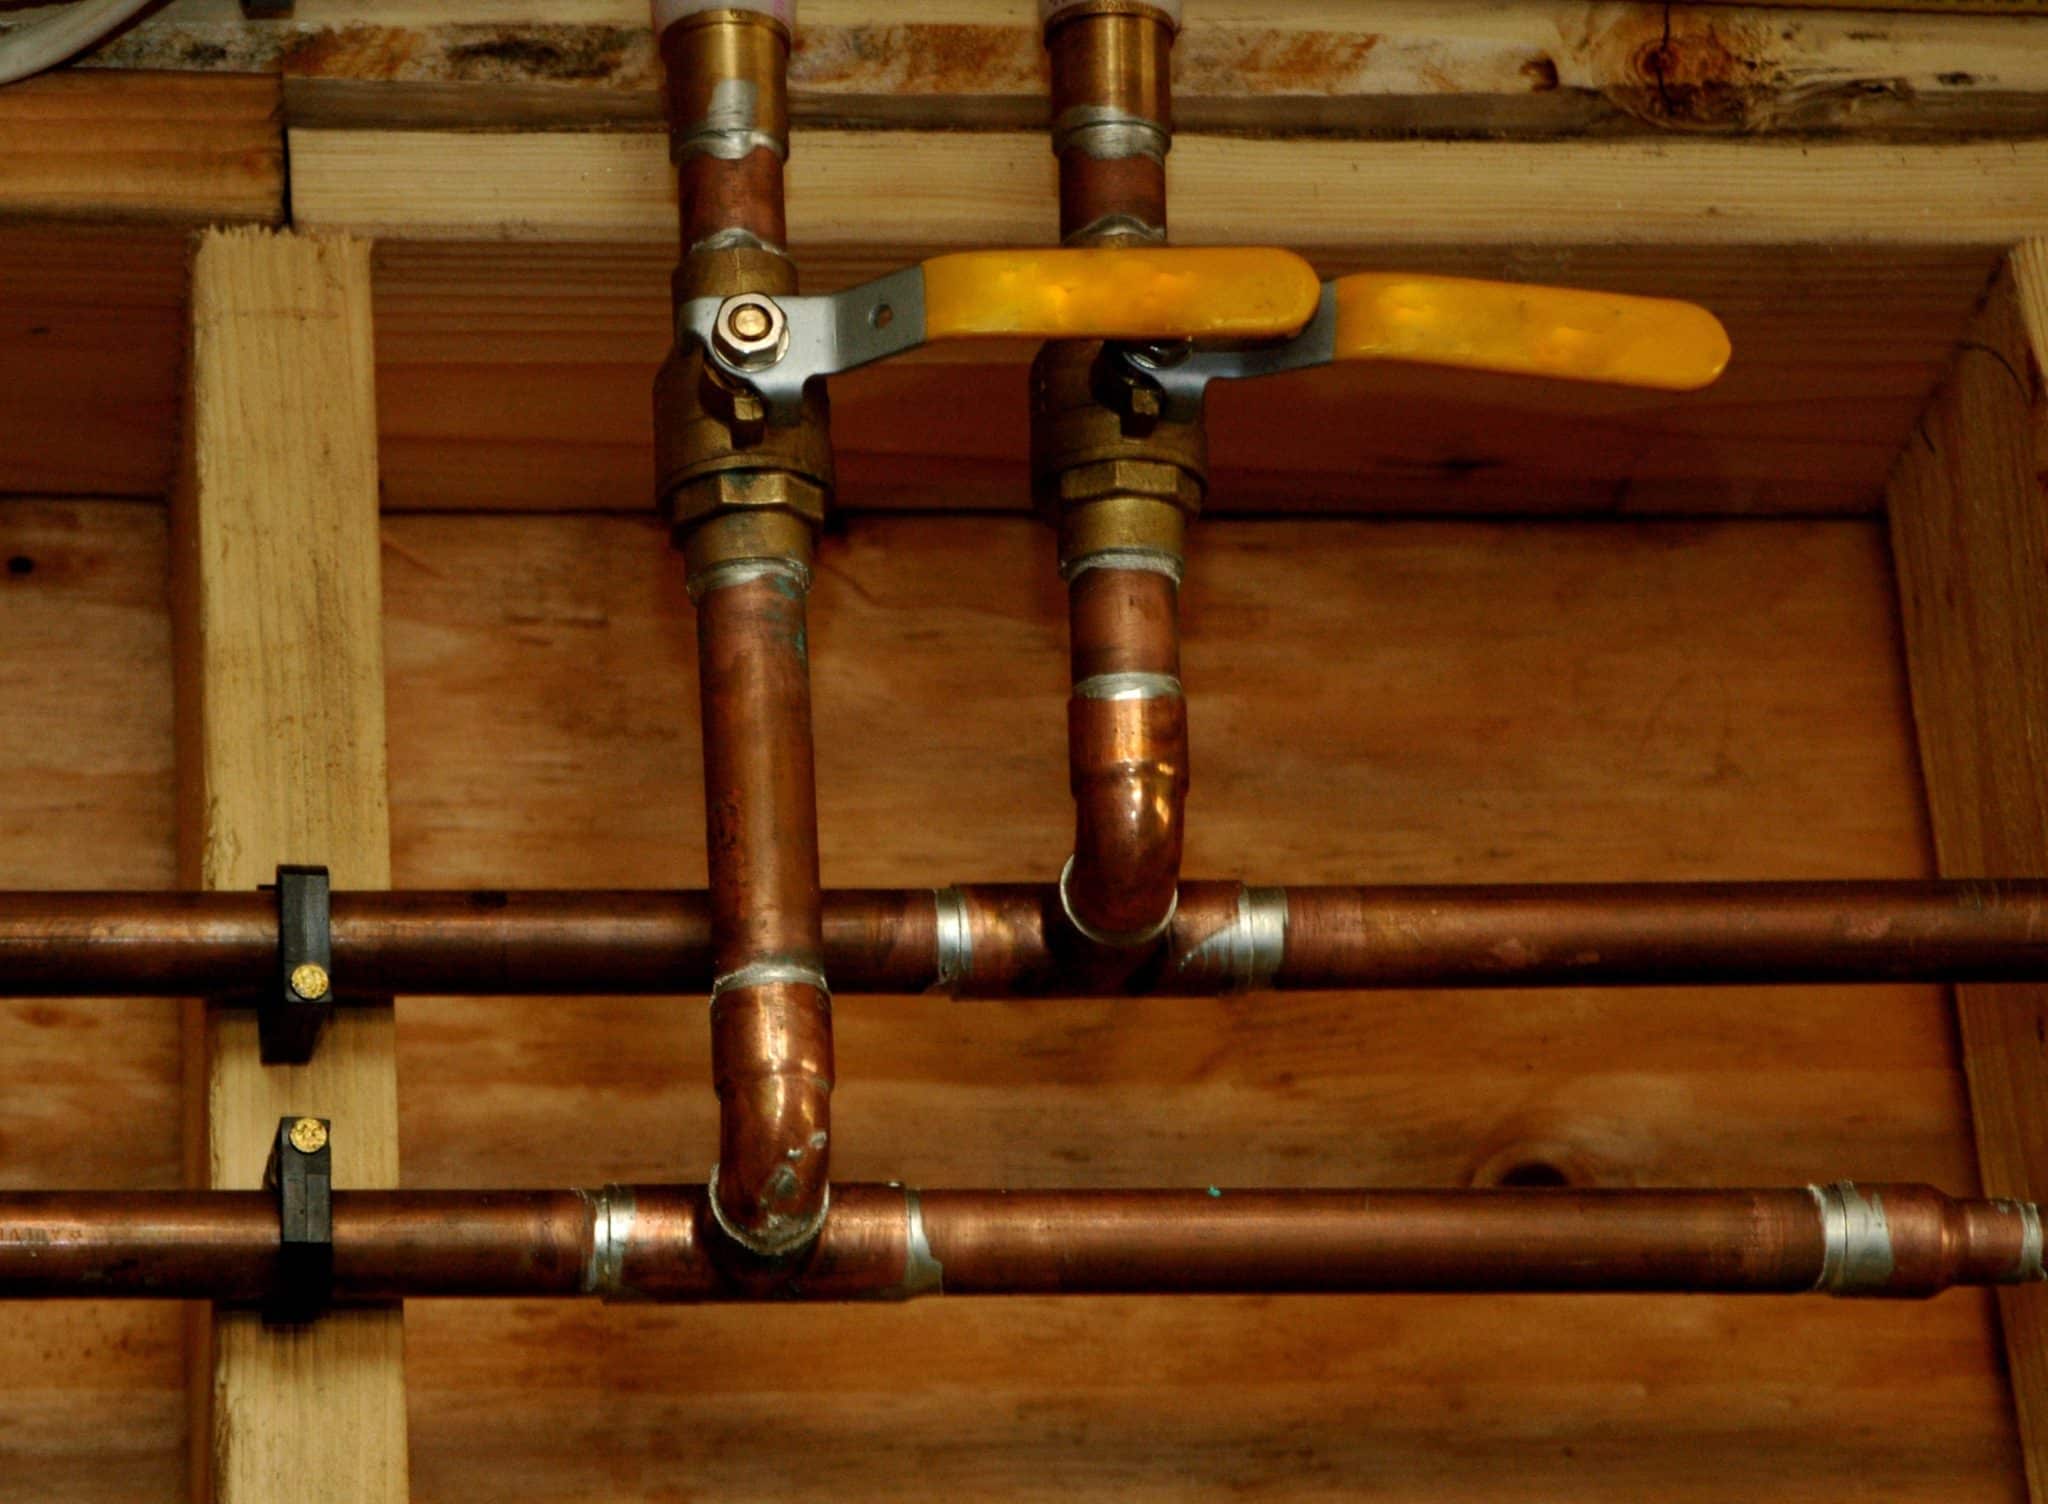 What Causes Pinhole Leaks in Copper Pipes?